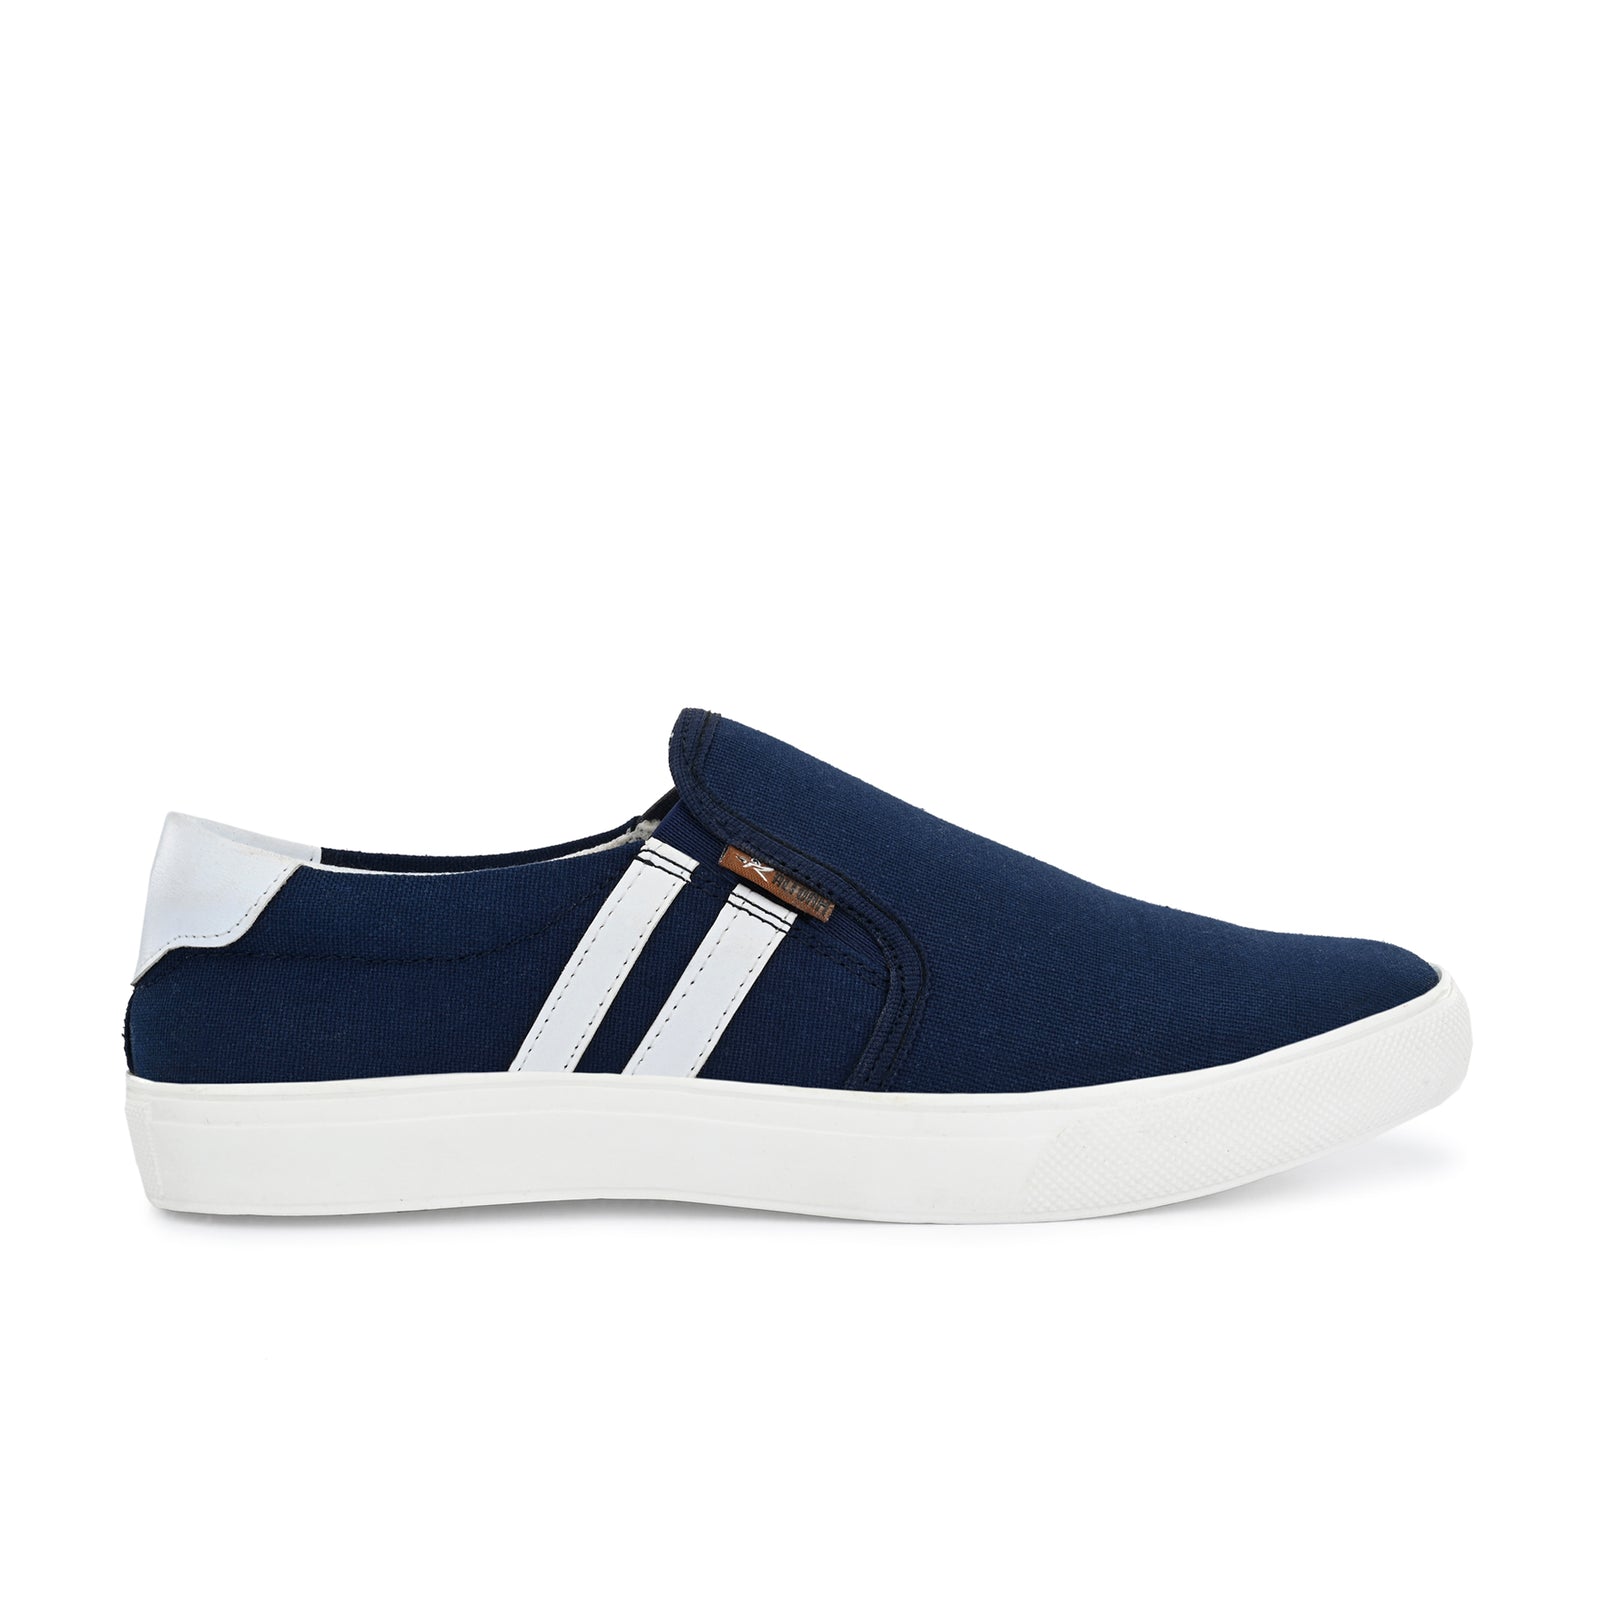 Blue Solid Canvas Slip On Lifestyle Casual Shoes For Men